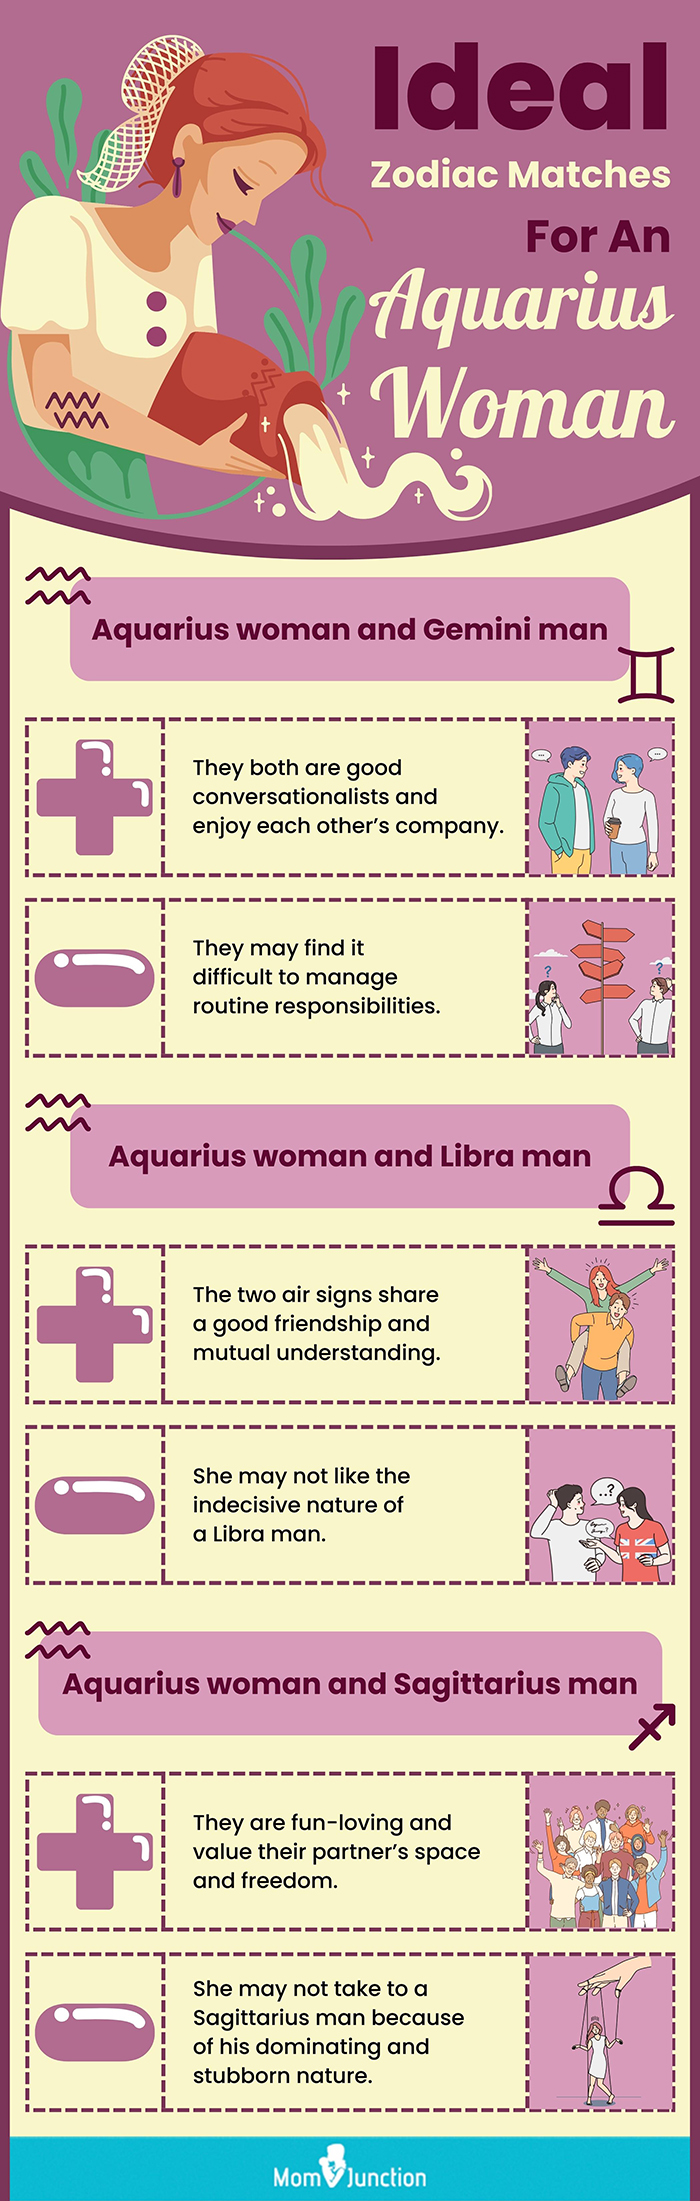 ideal zodiac matches for an aquarius woman [infographic]